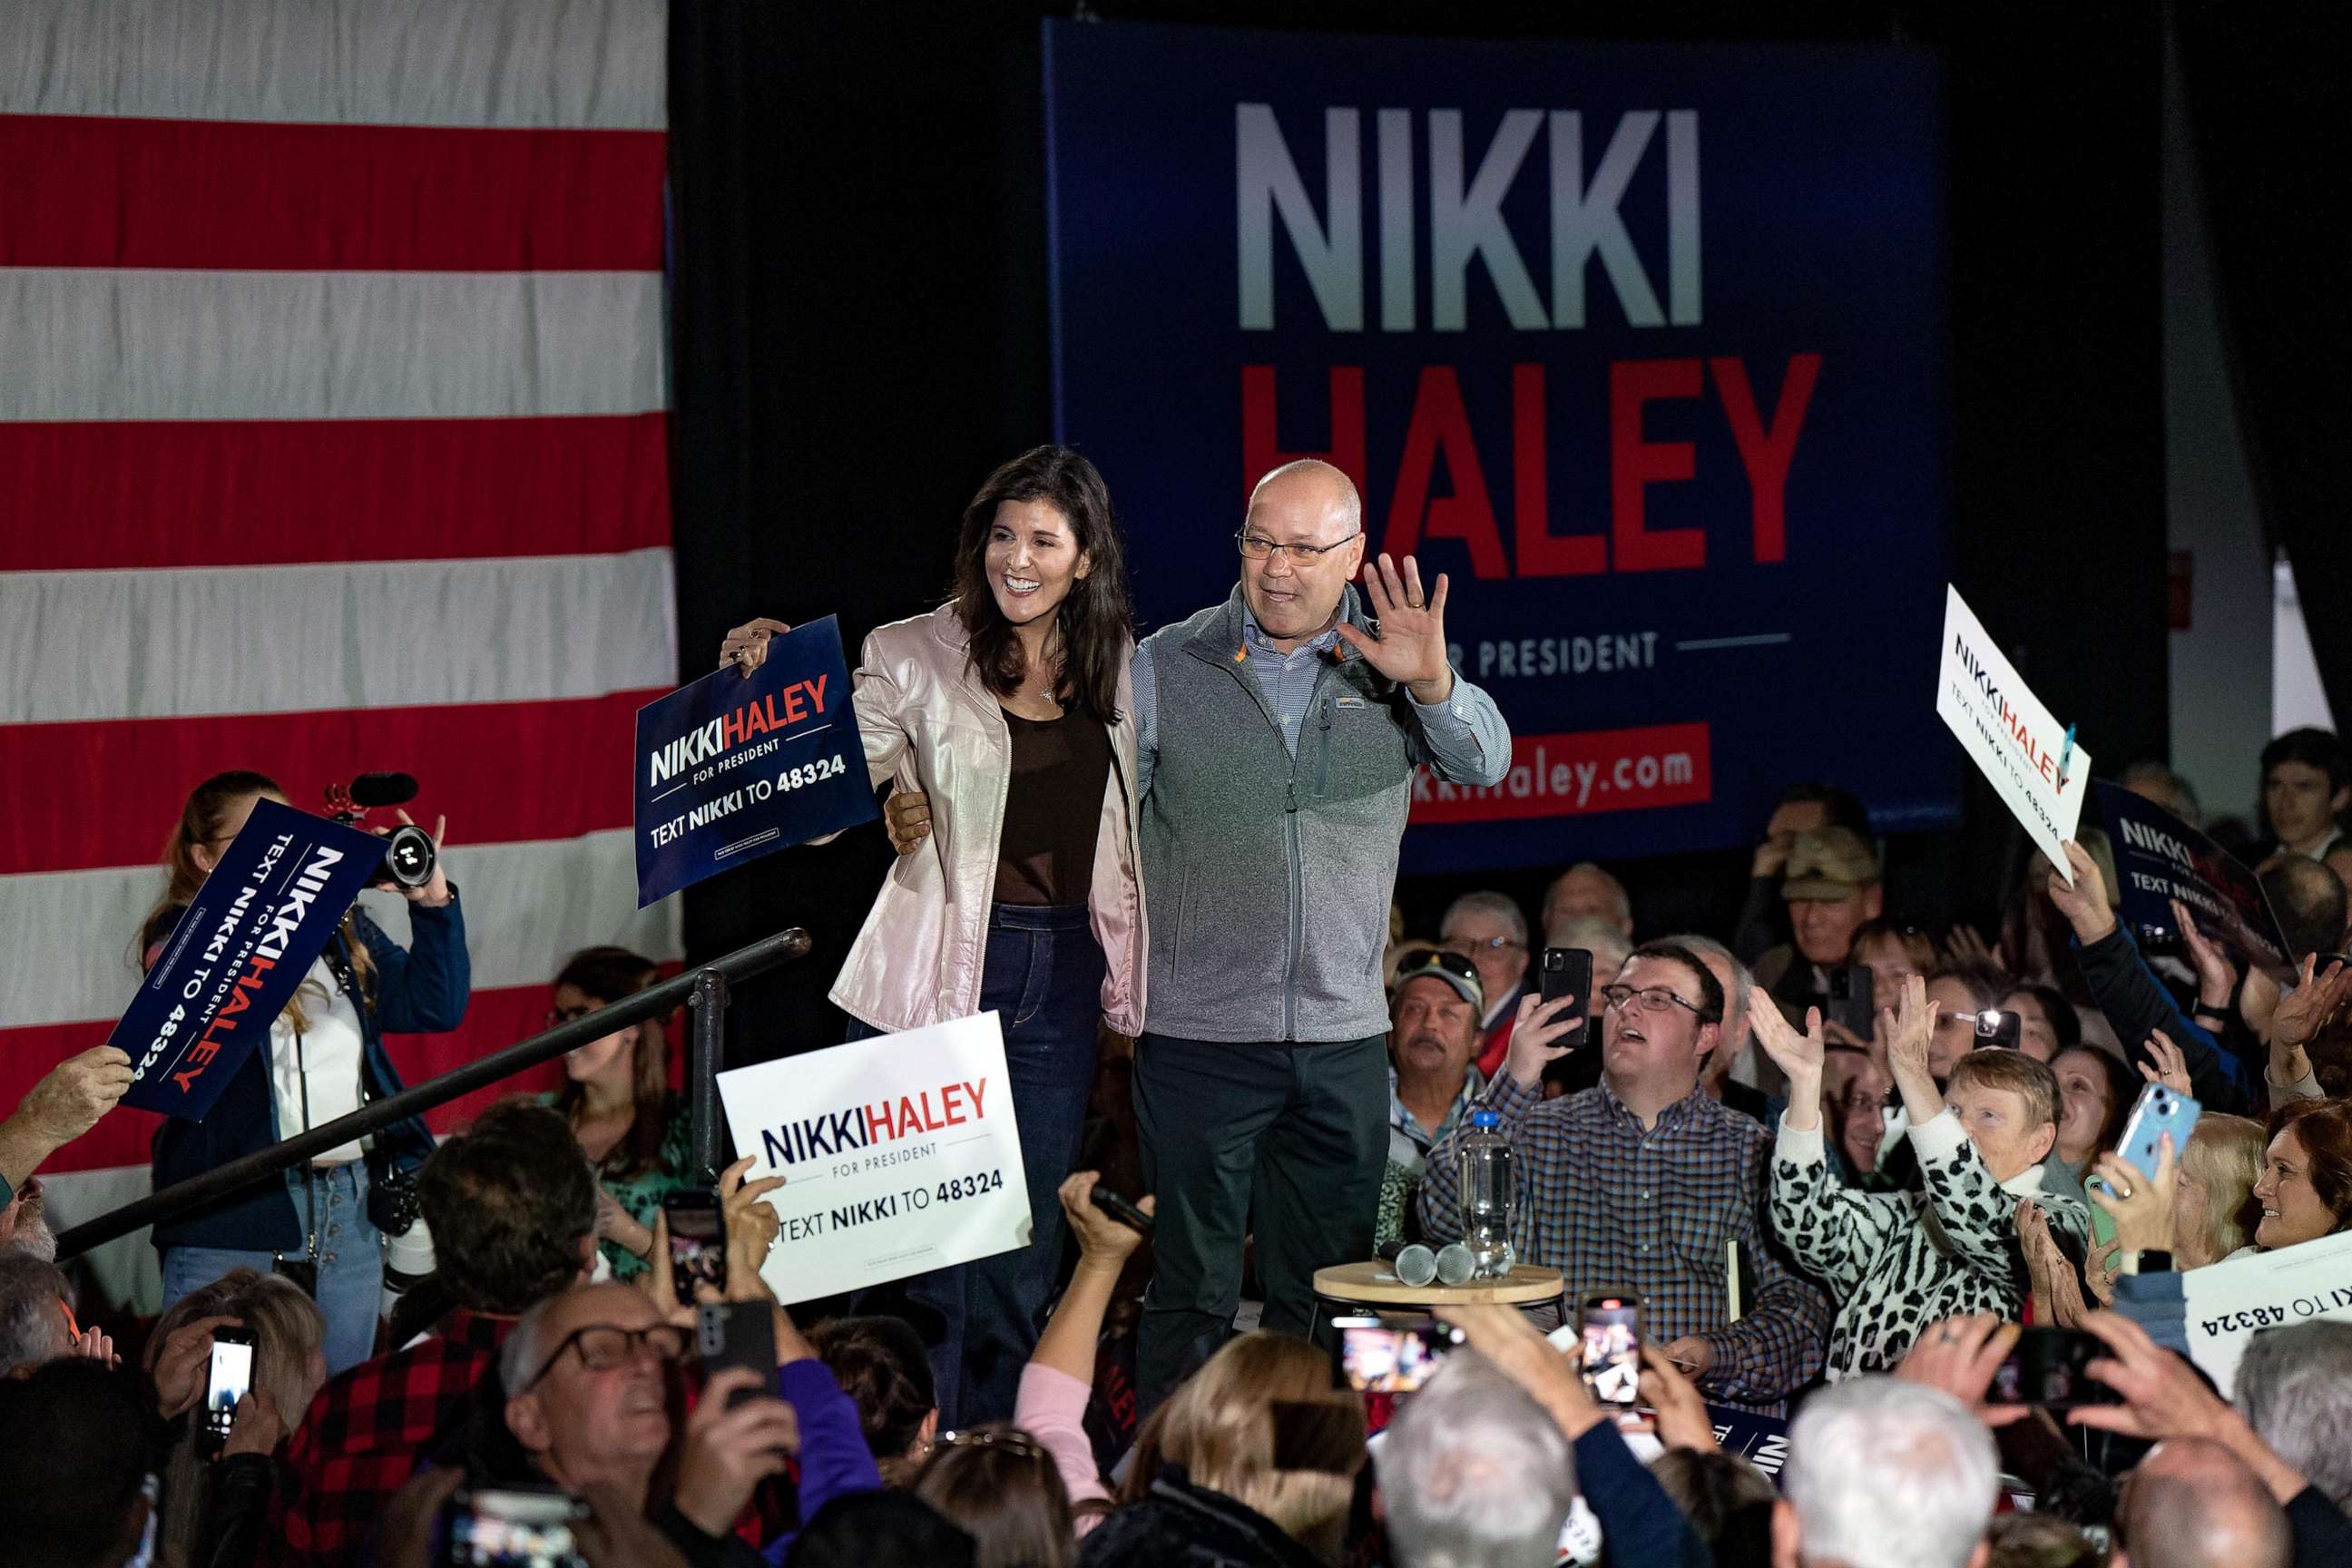 PHOTO: In this March 13, 2023, file photo, Nikki Haley, who officially announced her candidacy from the Republican Party in the 2024 presidential elections, waves with her husband Michael Haley after a campaign event in South Carolina.